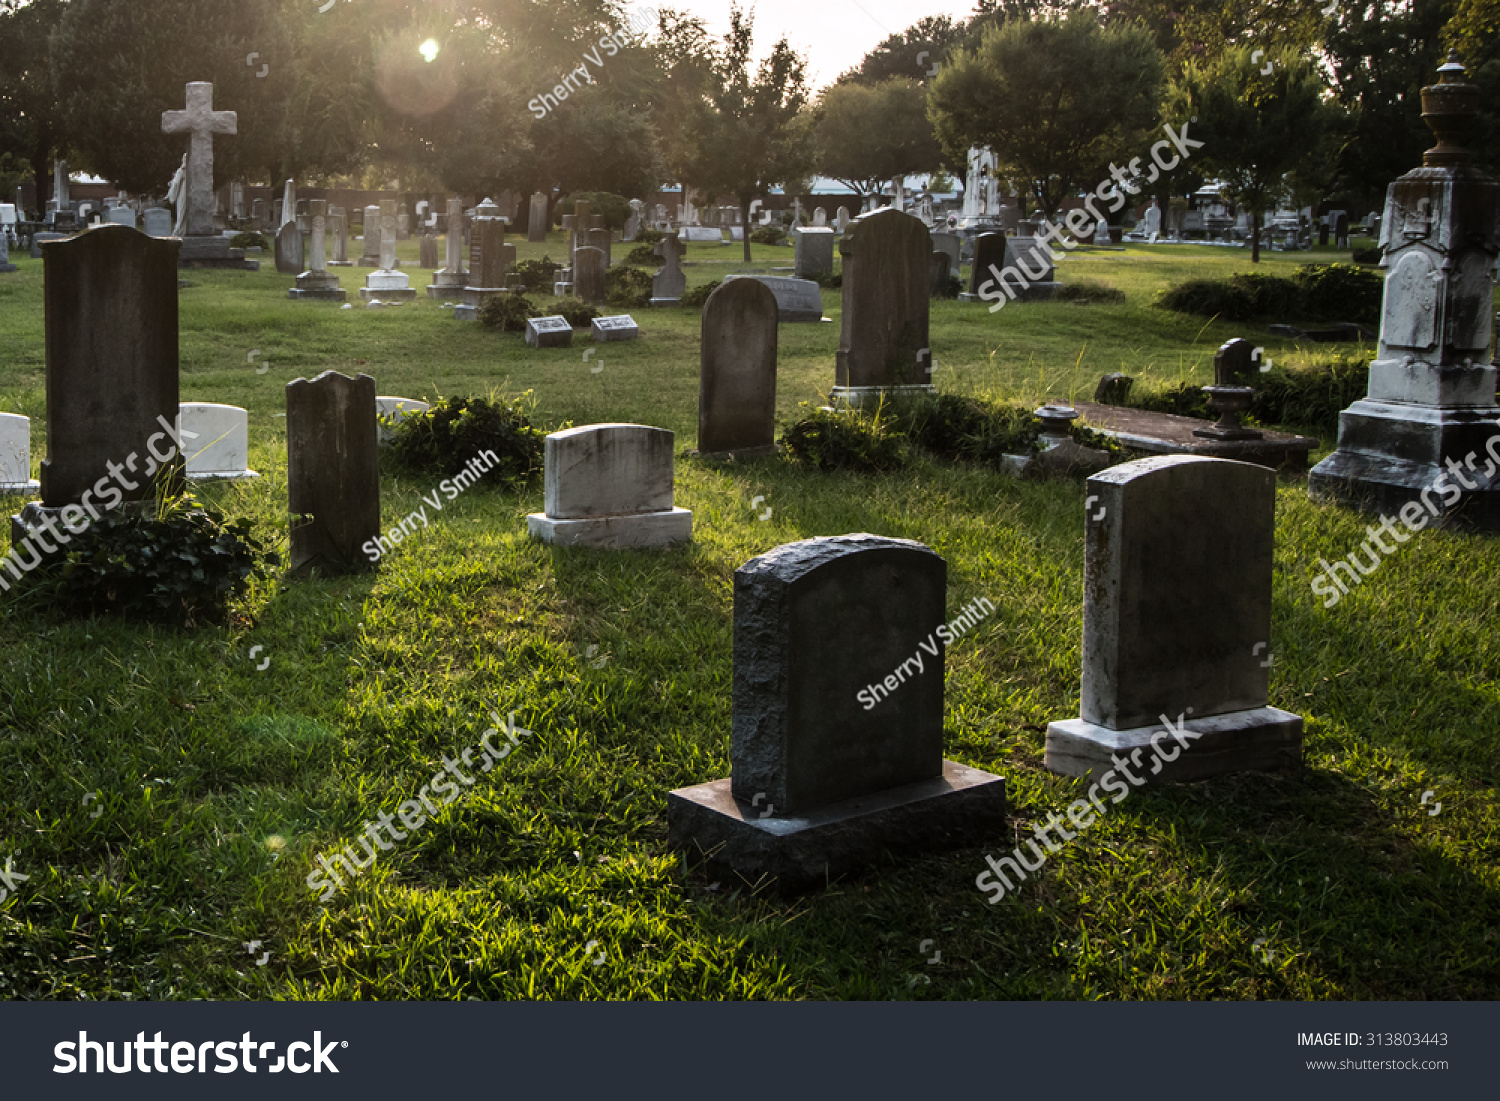 Tombstones in cemetery at dusk #313803443